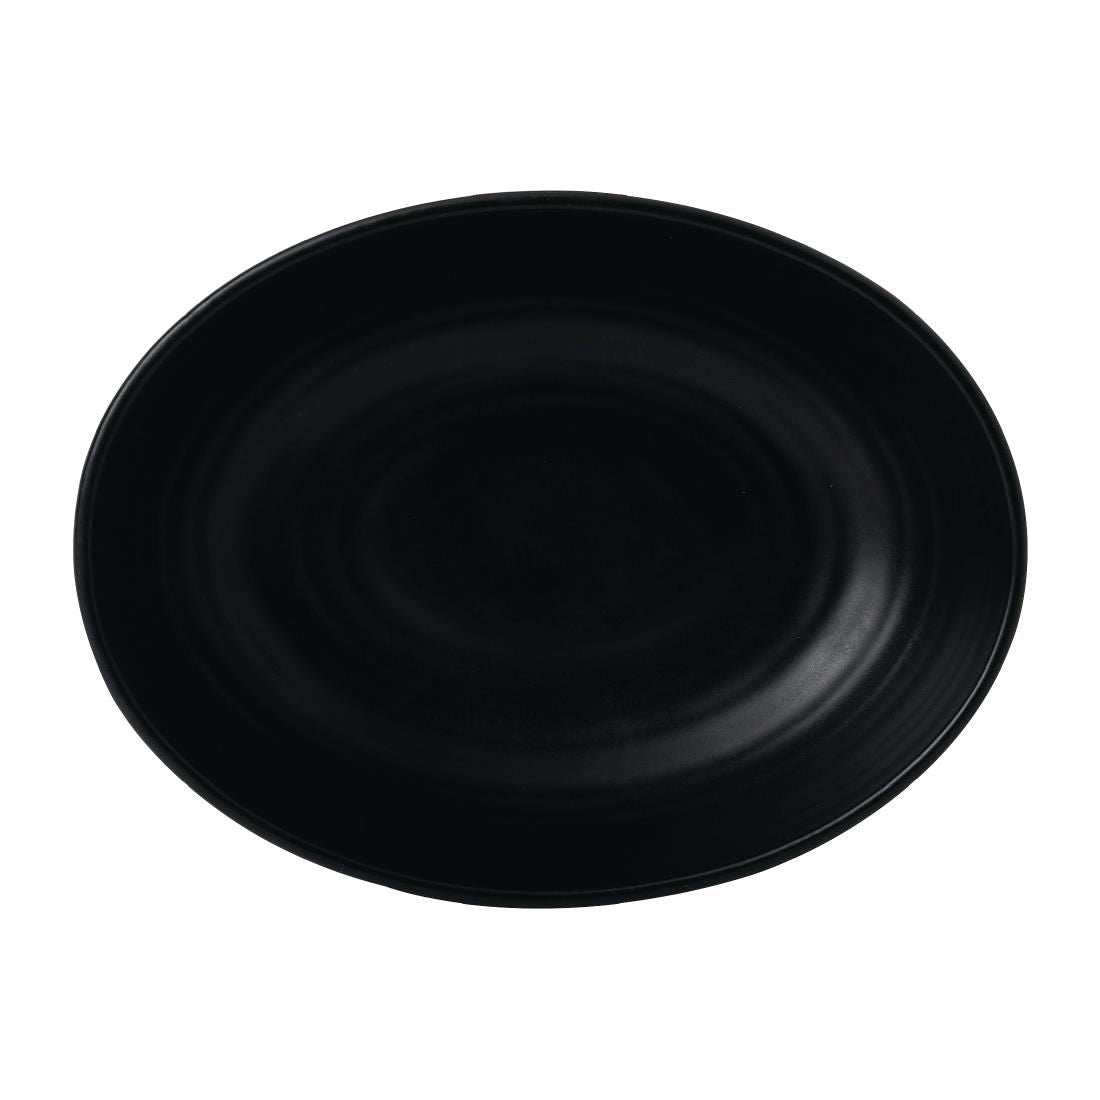 FE315 Dudson Evo Jet Deep Oval Bowl 216 x 162mm (Pack of 6) JD Catering Equipment Solutions Ltd